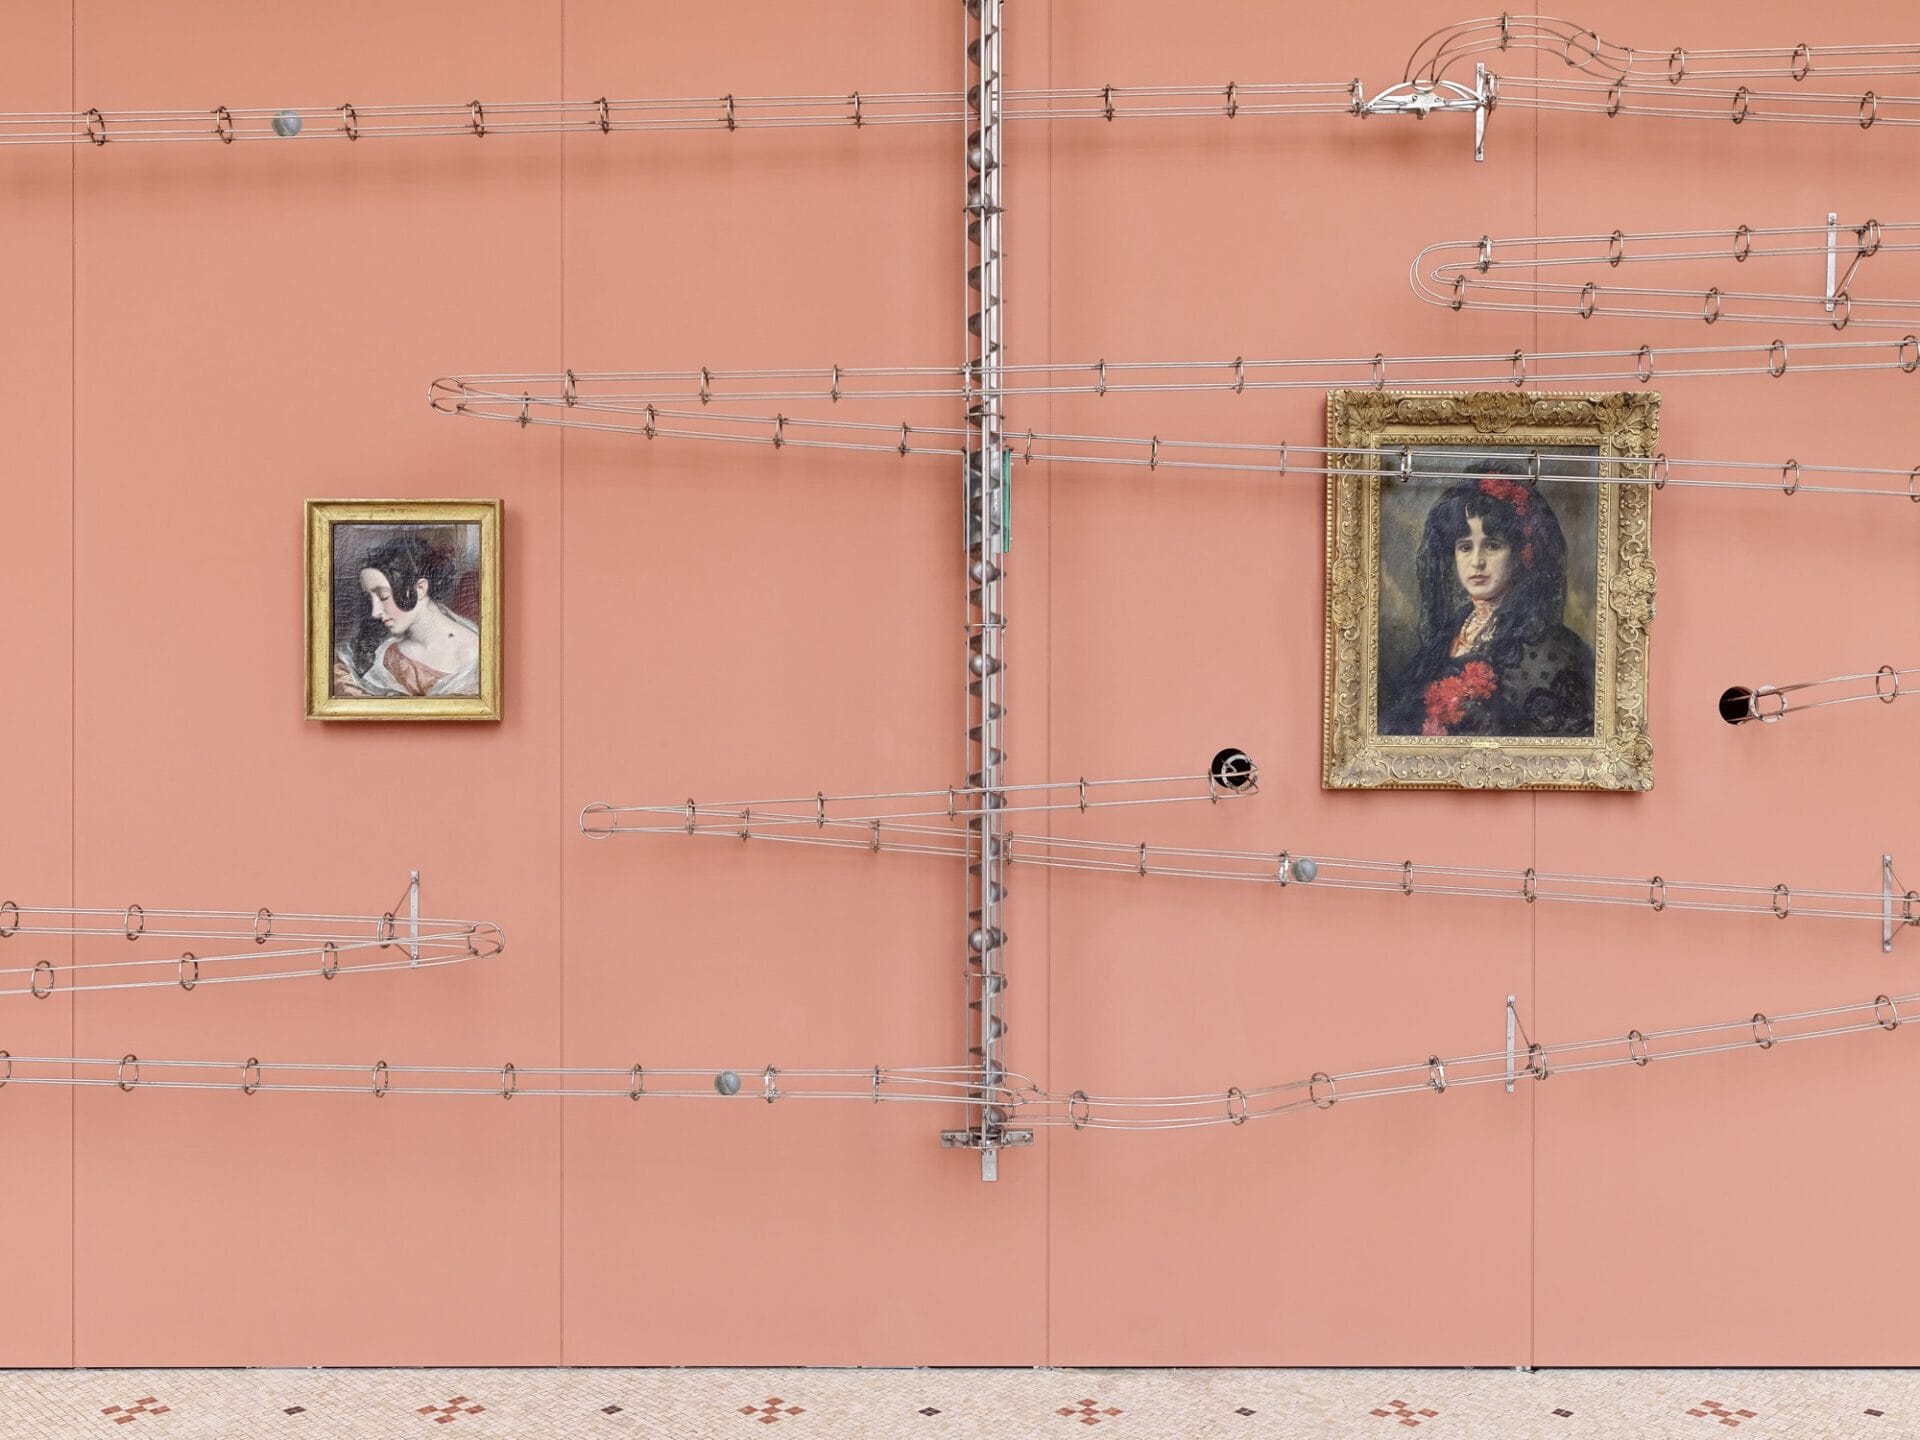 two historic paintings on a pink wall with metal framework and arms reaching across the wall and connecting them or going through holes